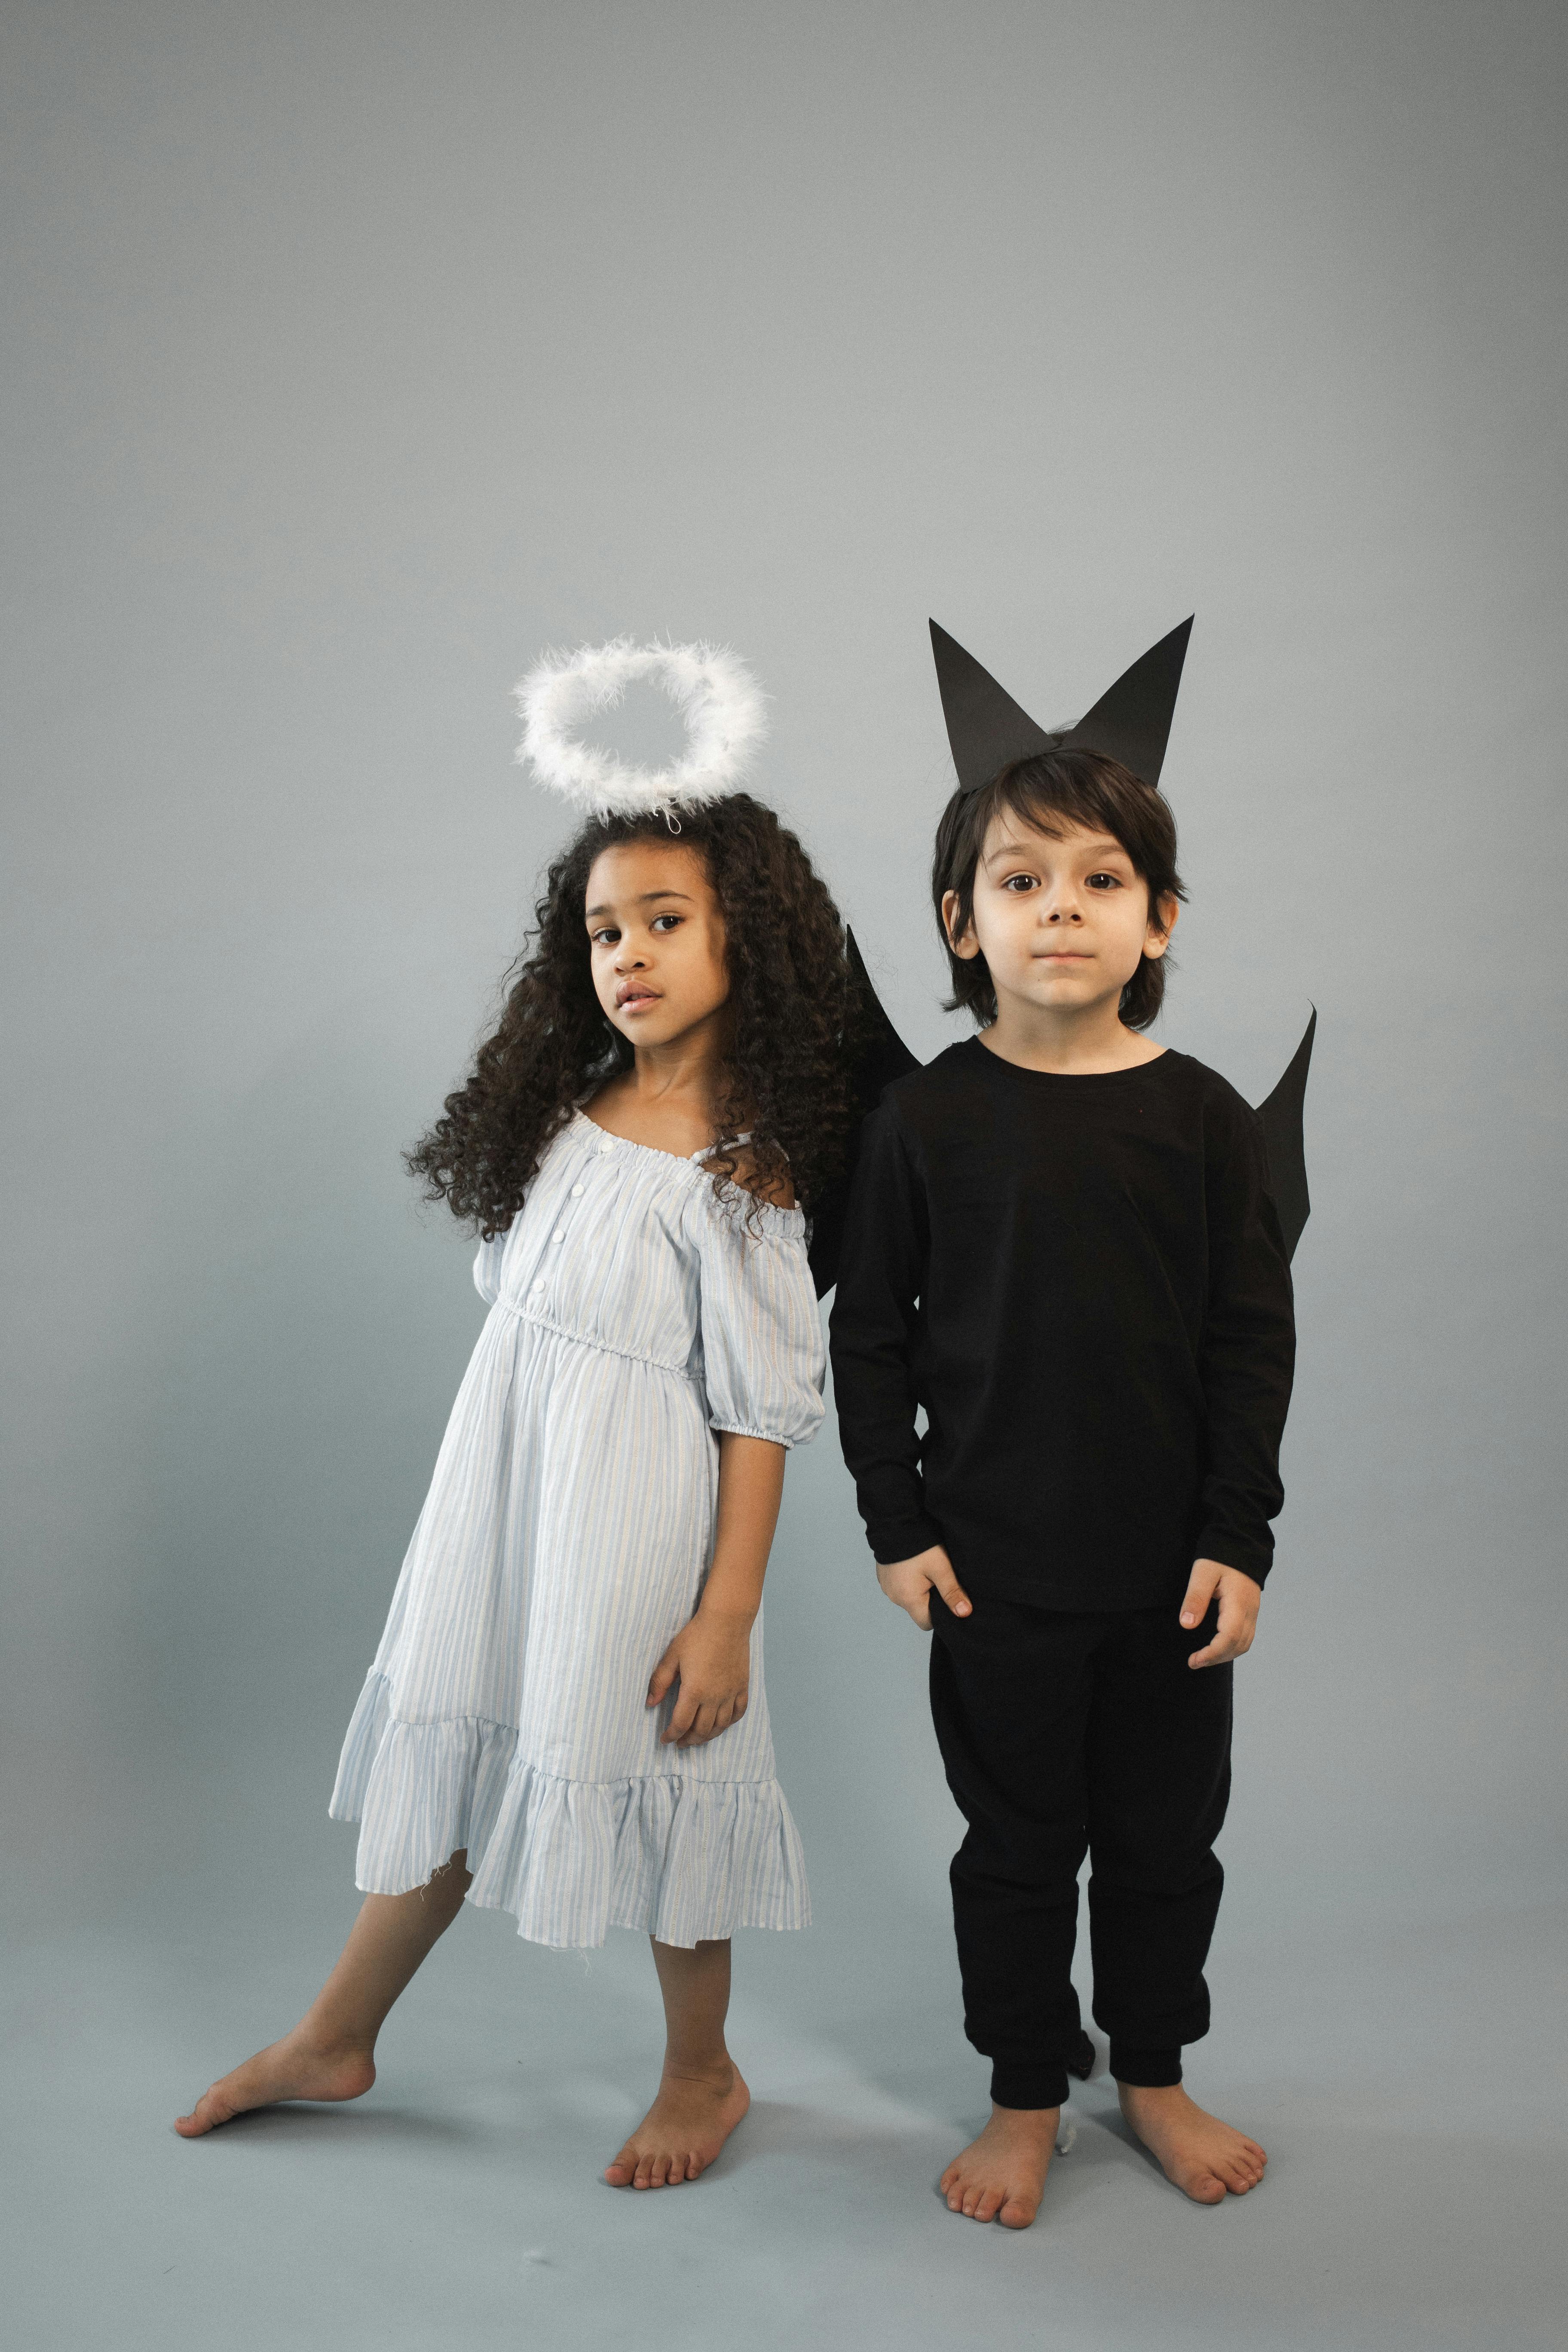 Cute diverse kids in angel and bat costumes · Free Stock Photo